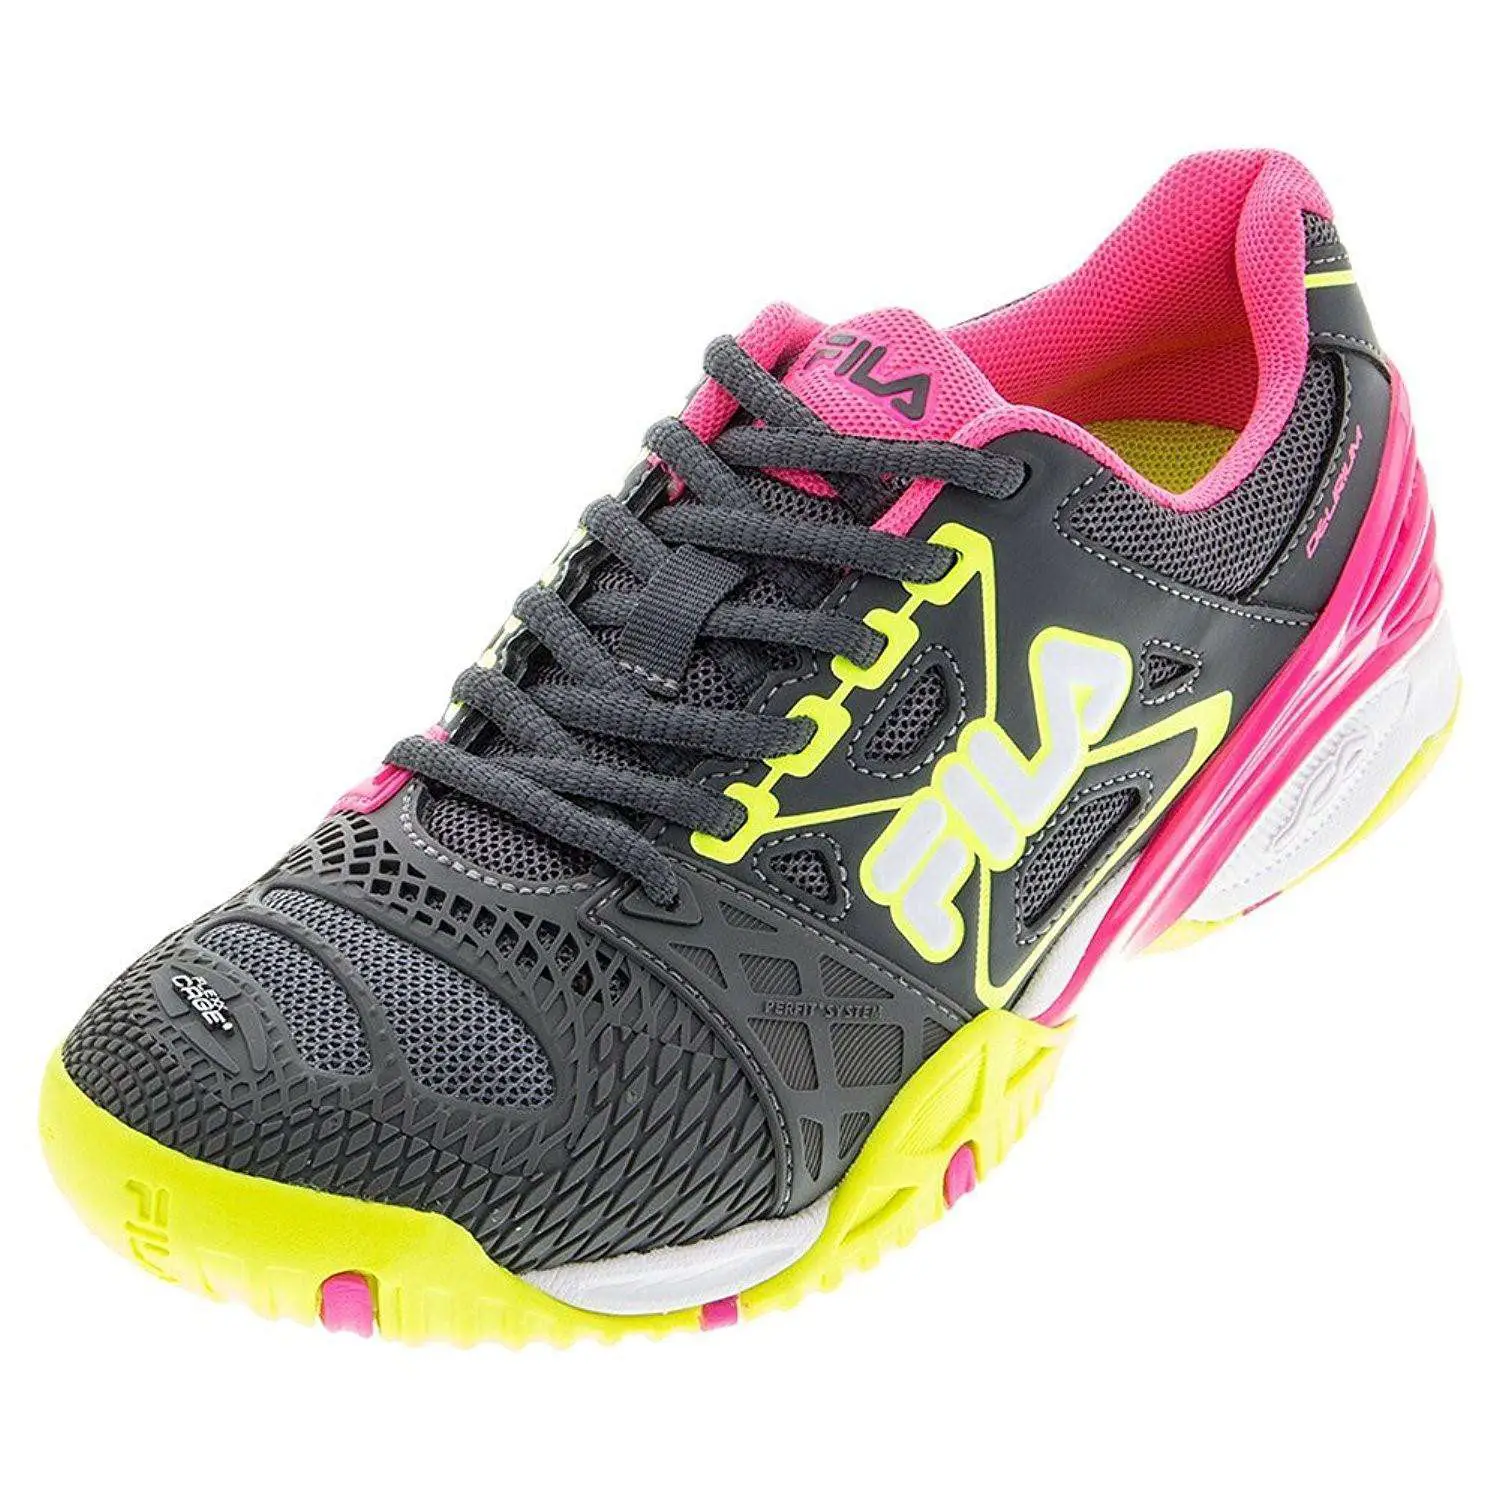 Top 10 Best Tennis Shoes For Women (2020 Edition)